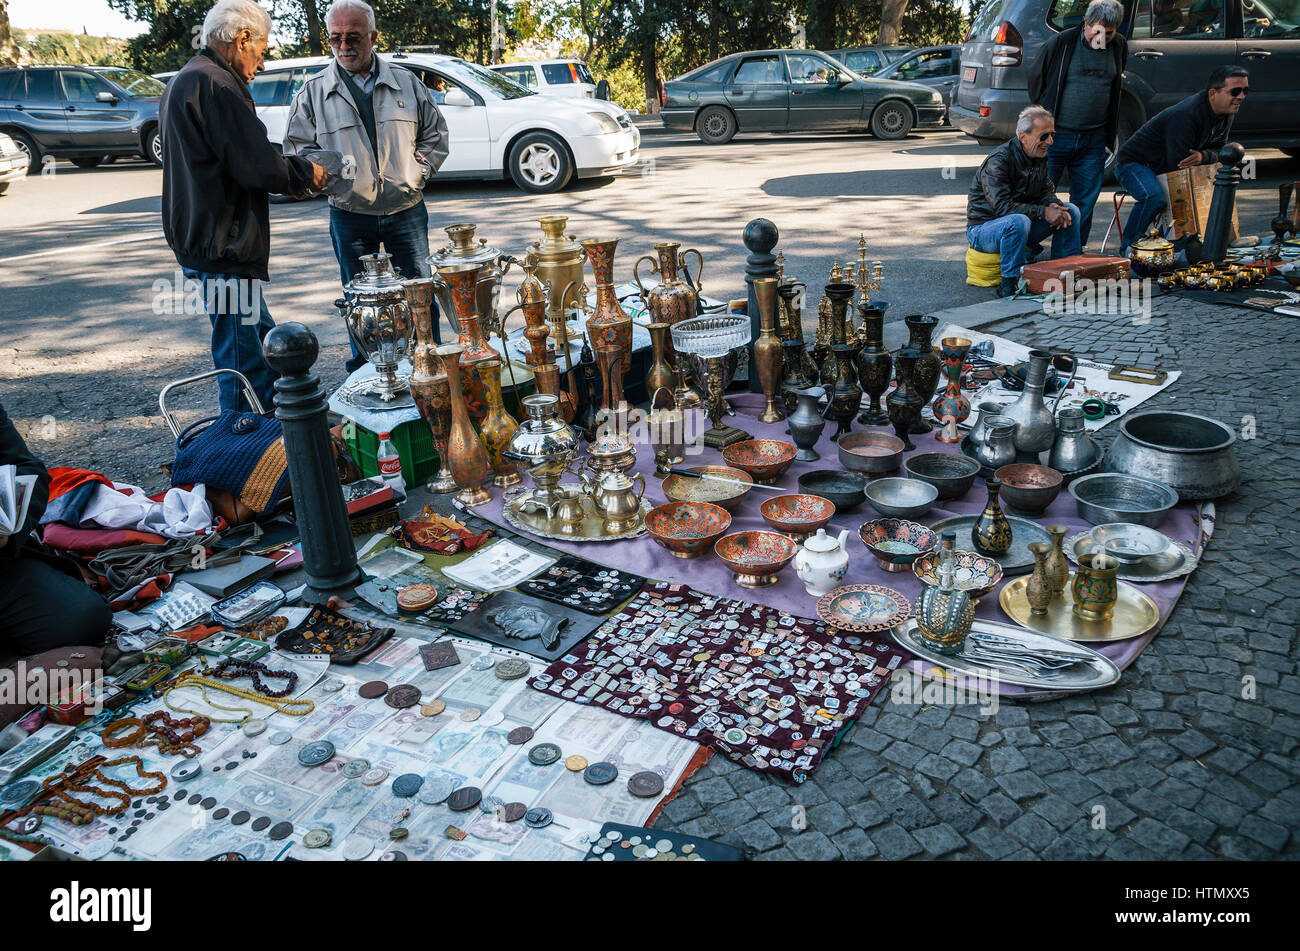 Tbilisi, Georgia - October 15, 2016: Traders and sellers of flea market on Dry bridge having a lot of vintage pitchers, plates, handmade, banknotes, s Stock Photo